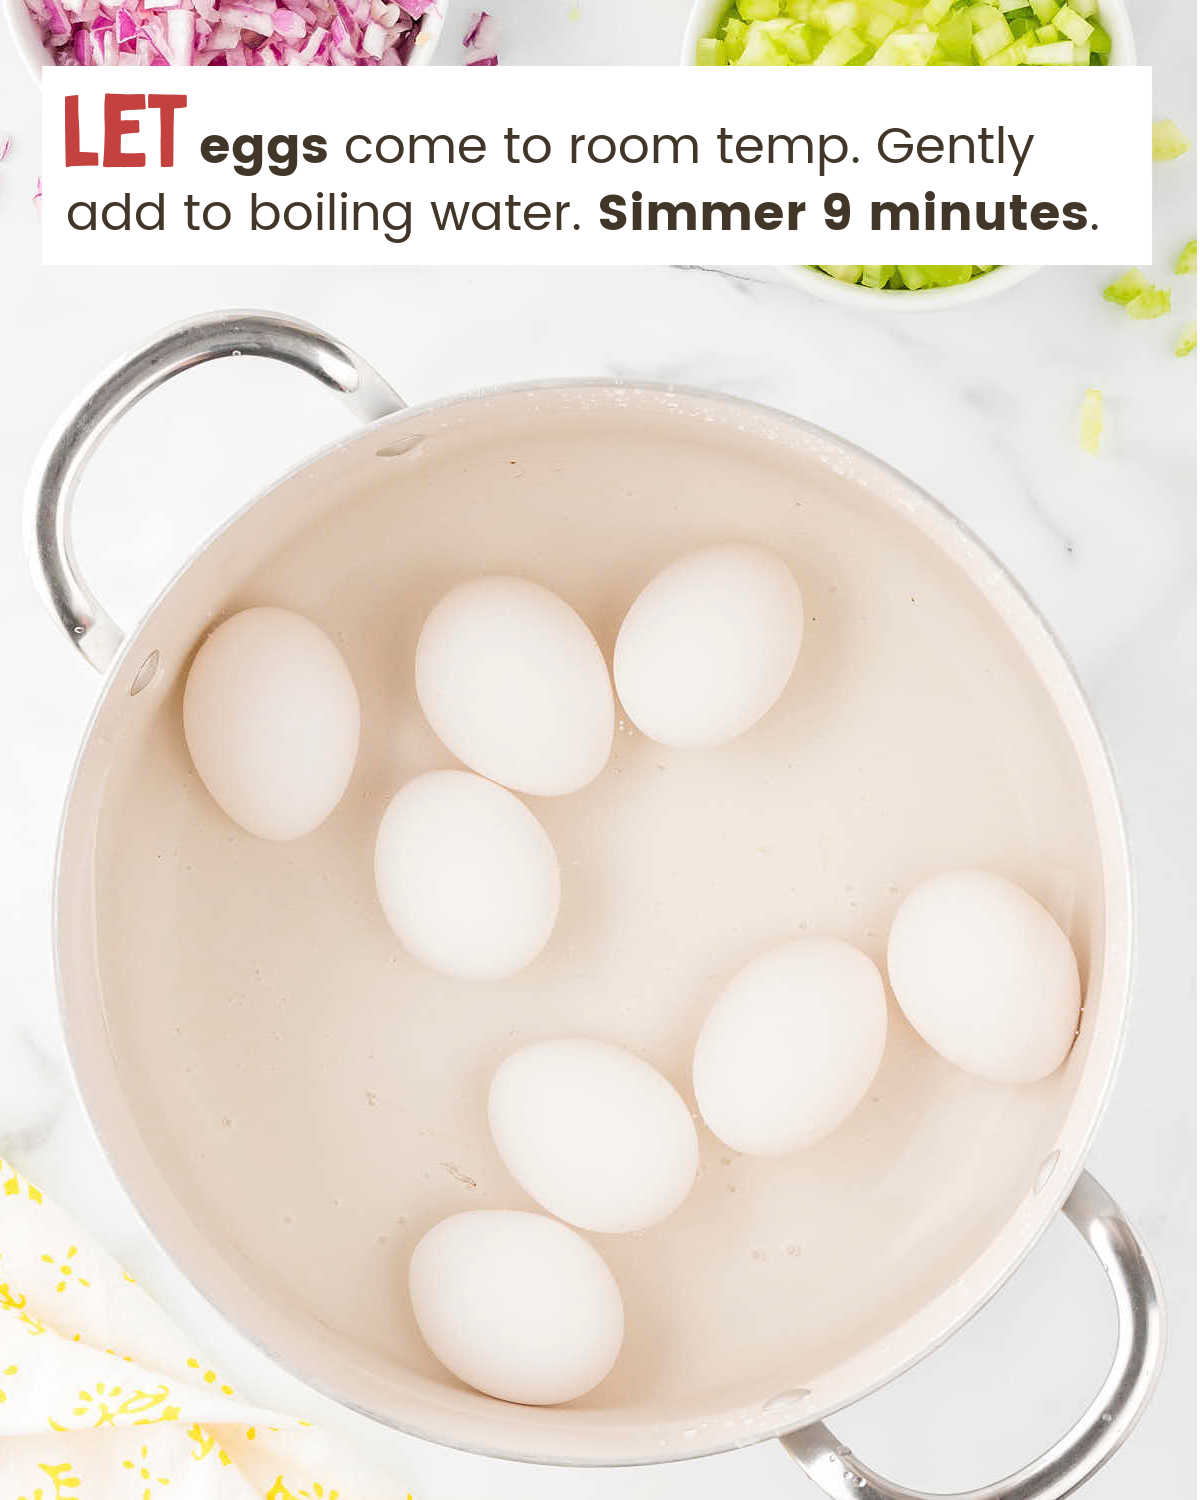 Boiling eggs in a pot for Egg Salad.